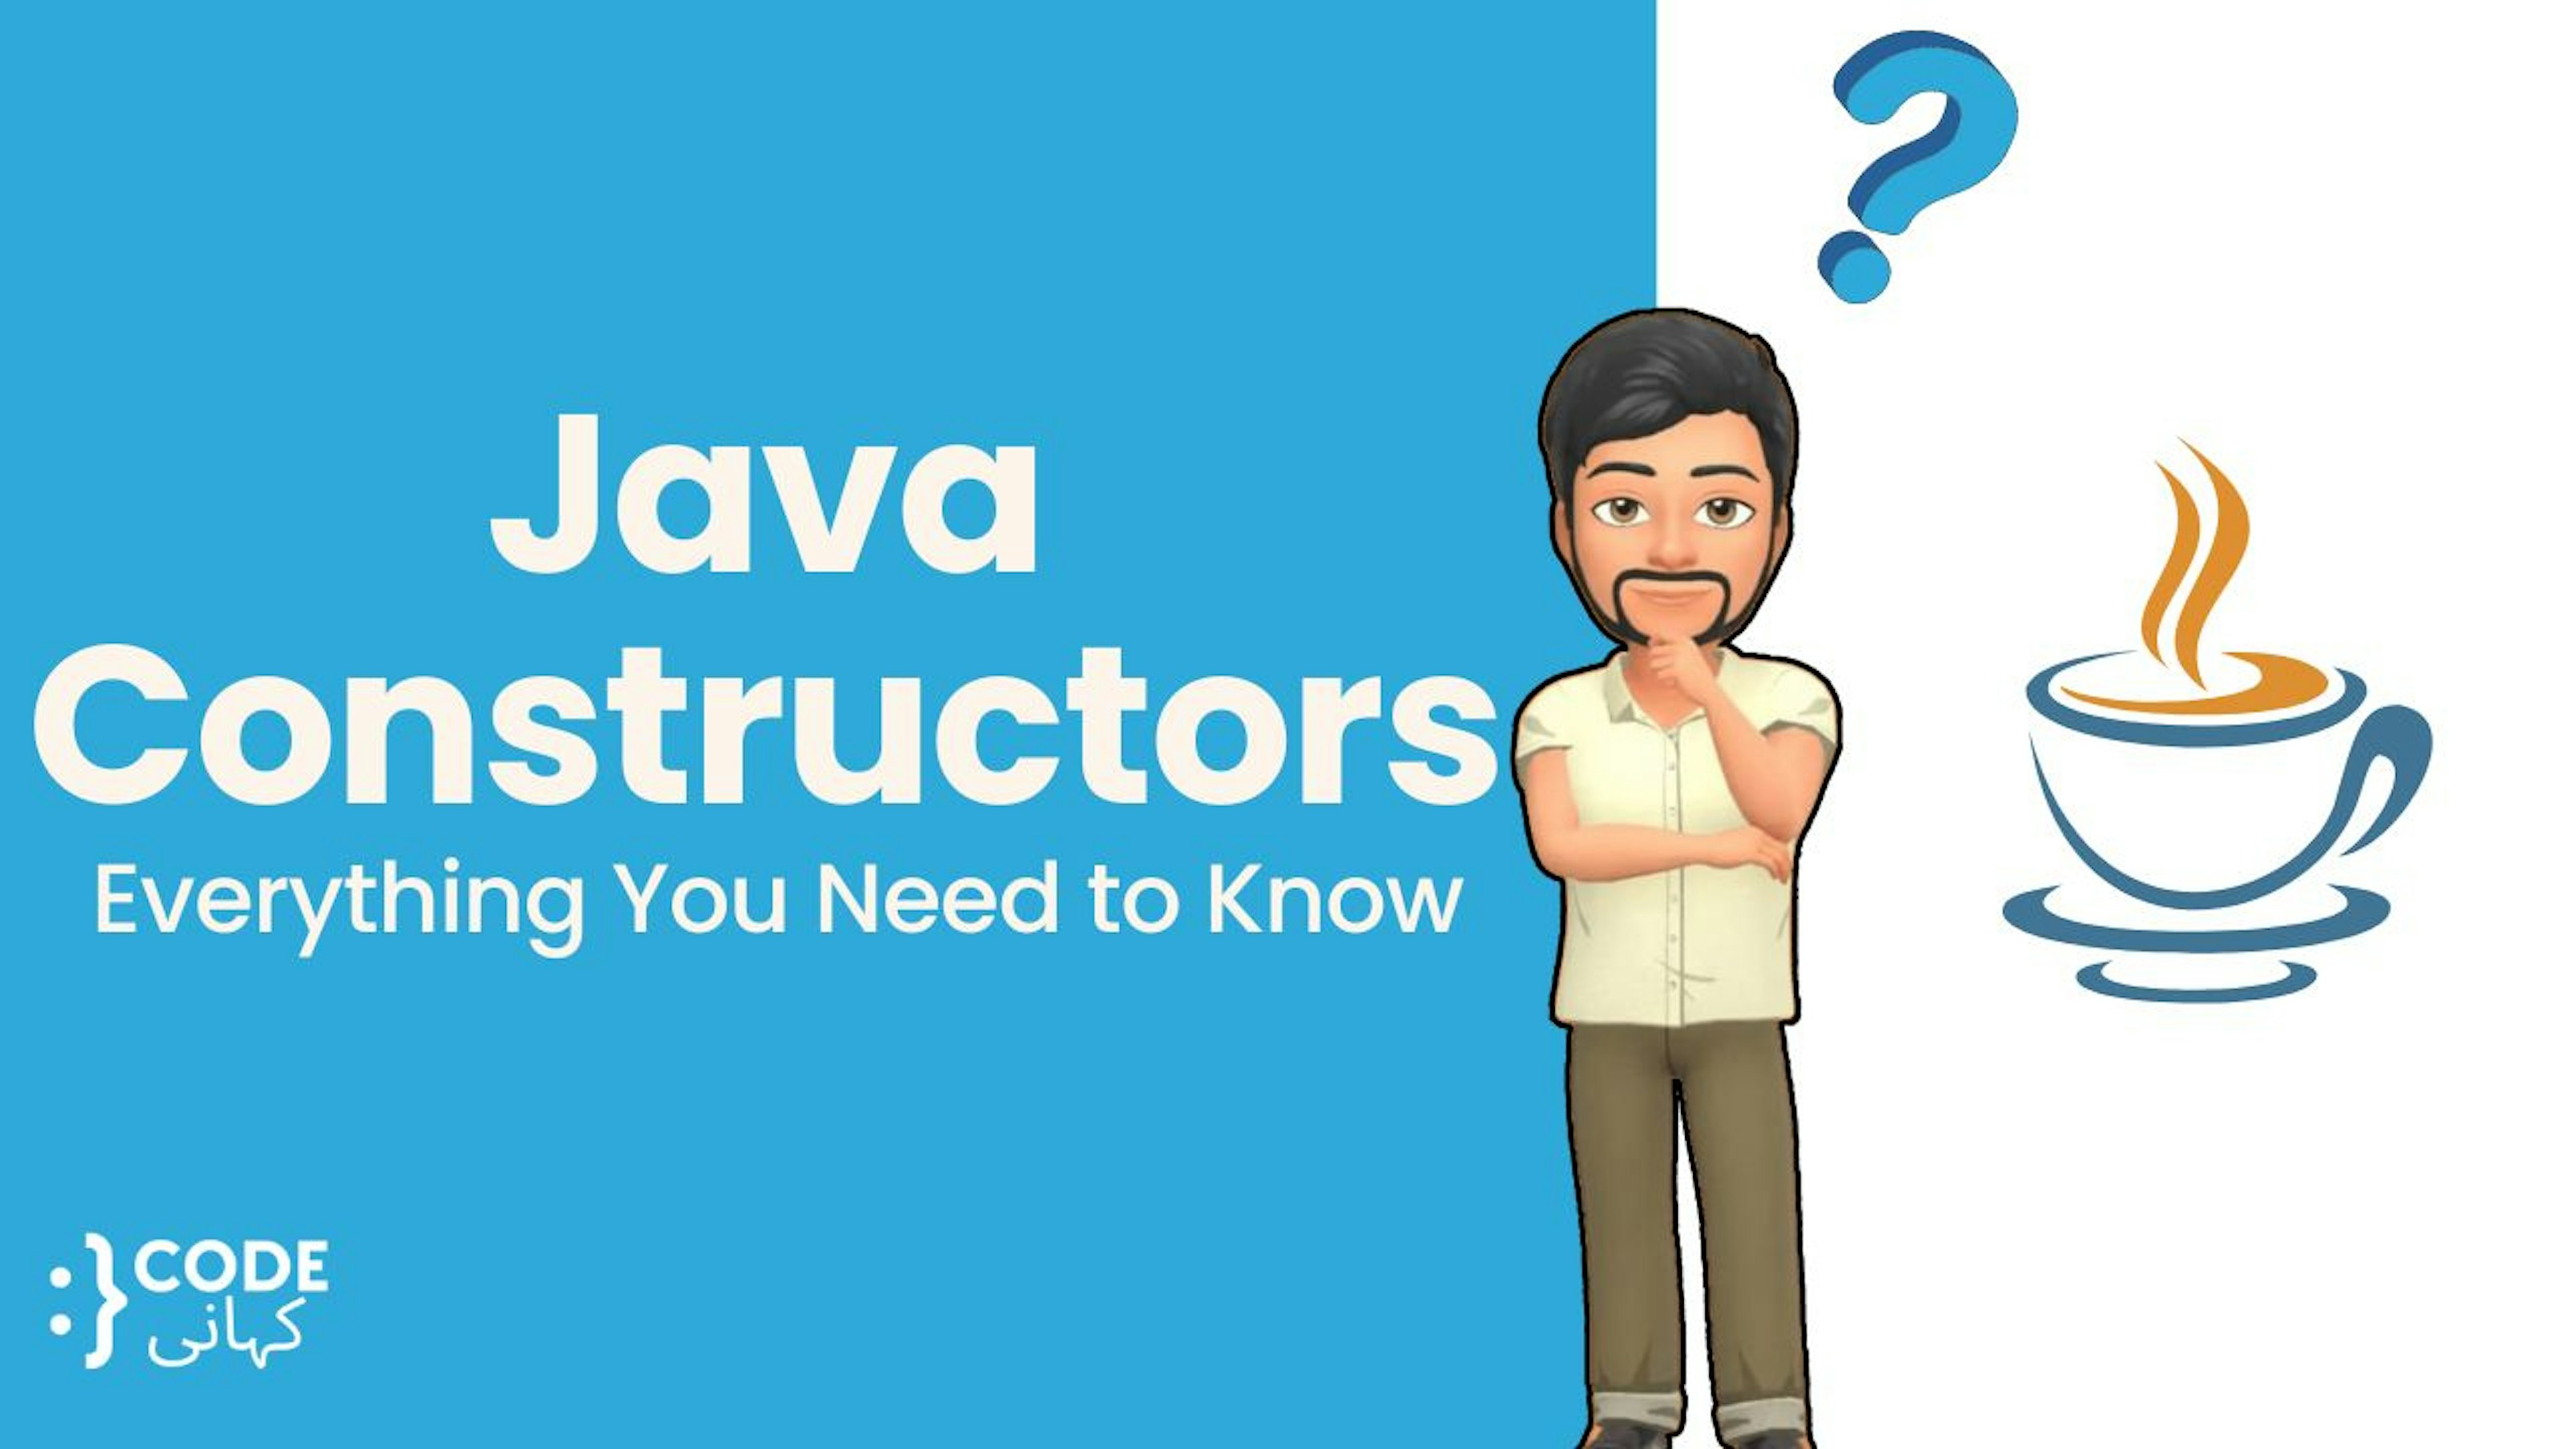 Java Constructors: Everything You Need to Know